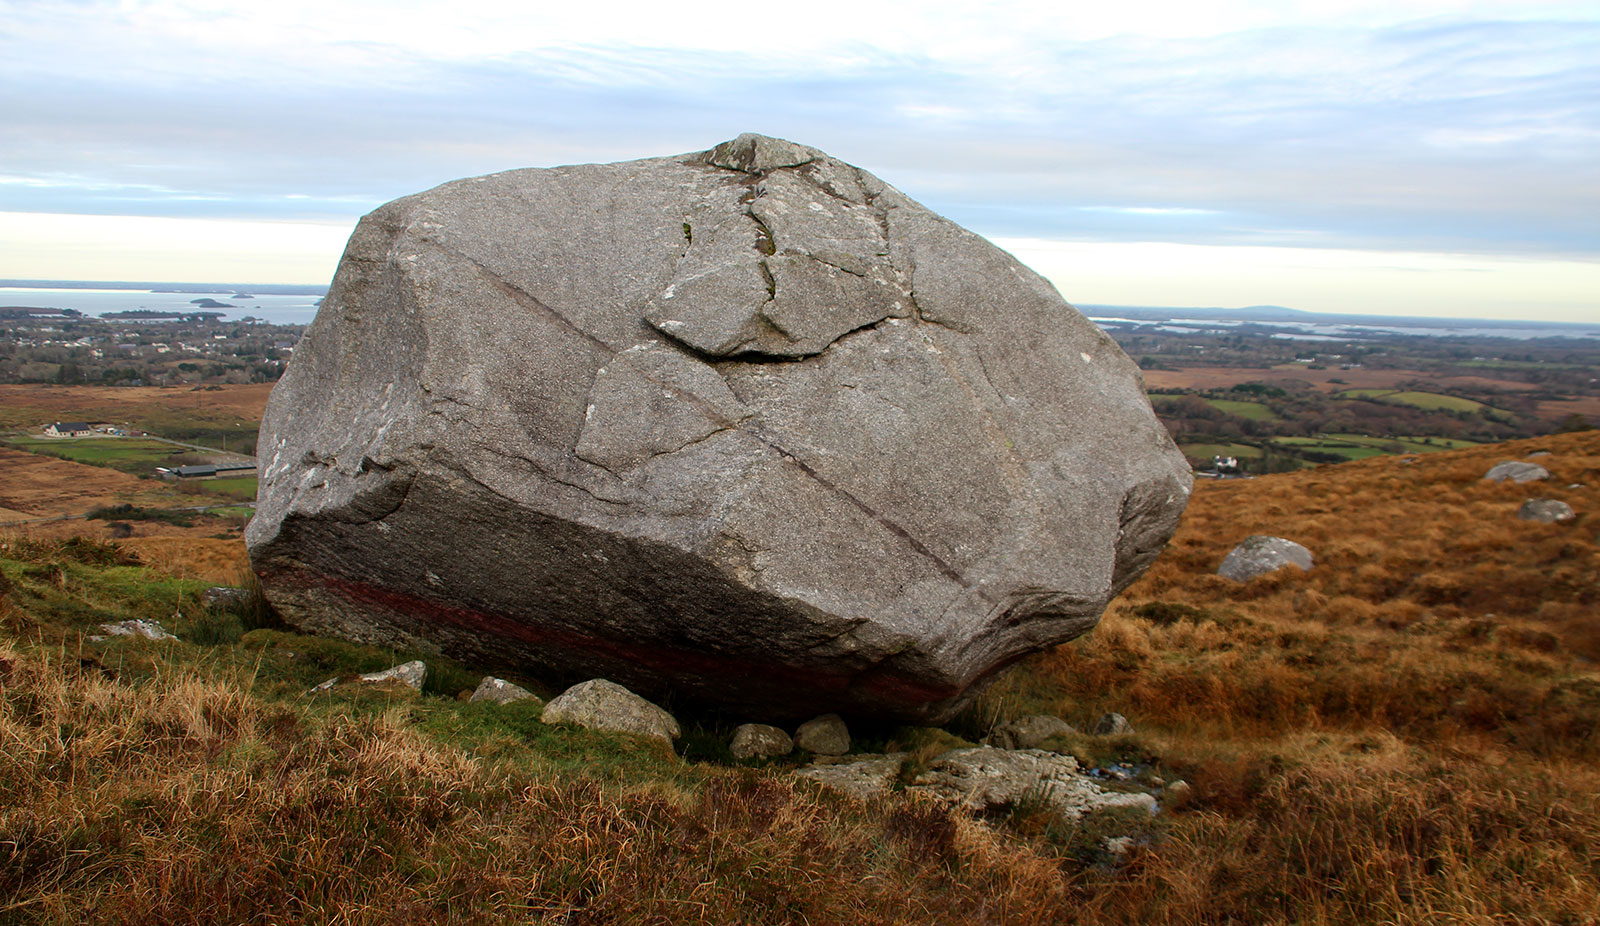 Saint Patrick's Rock close to Oughterard in County Galway.